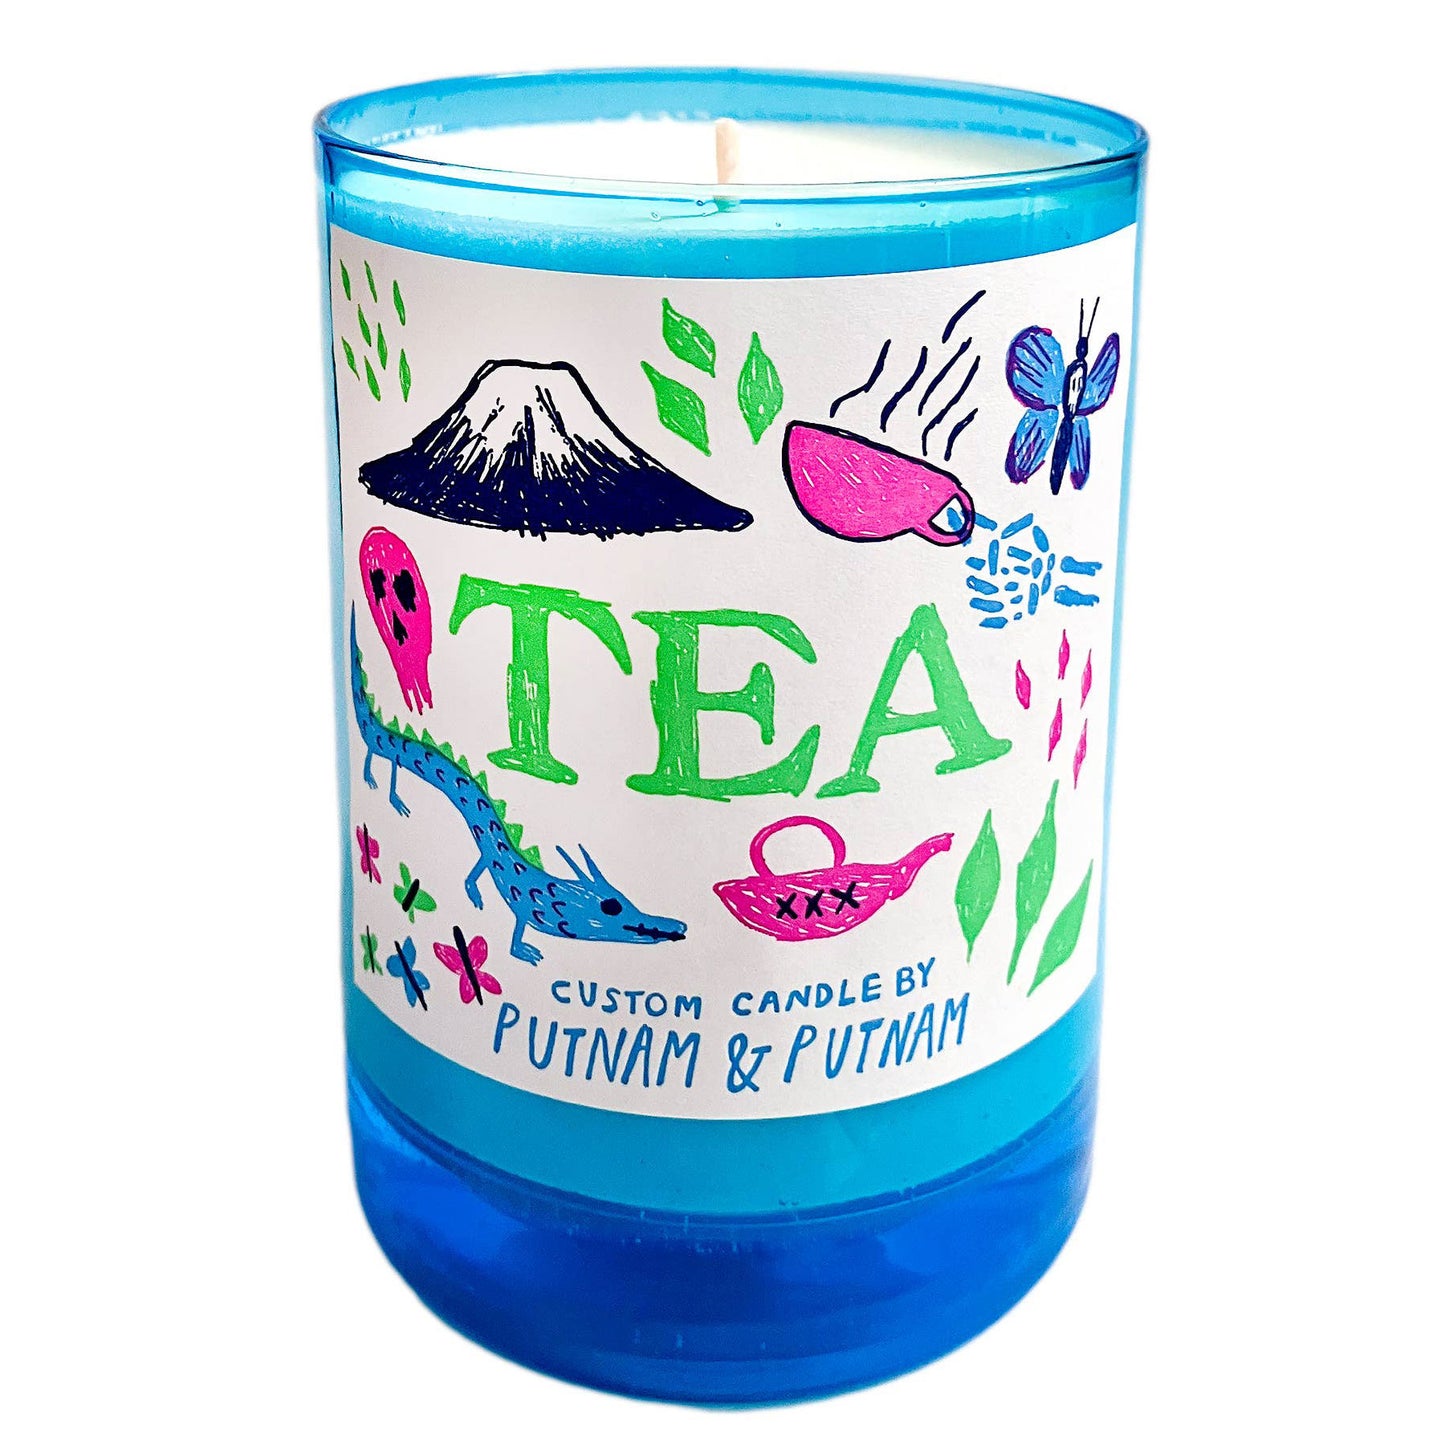 Tea Candle - The Crowd Went Wild